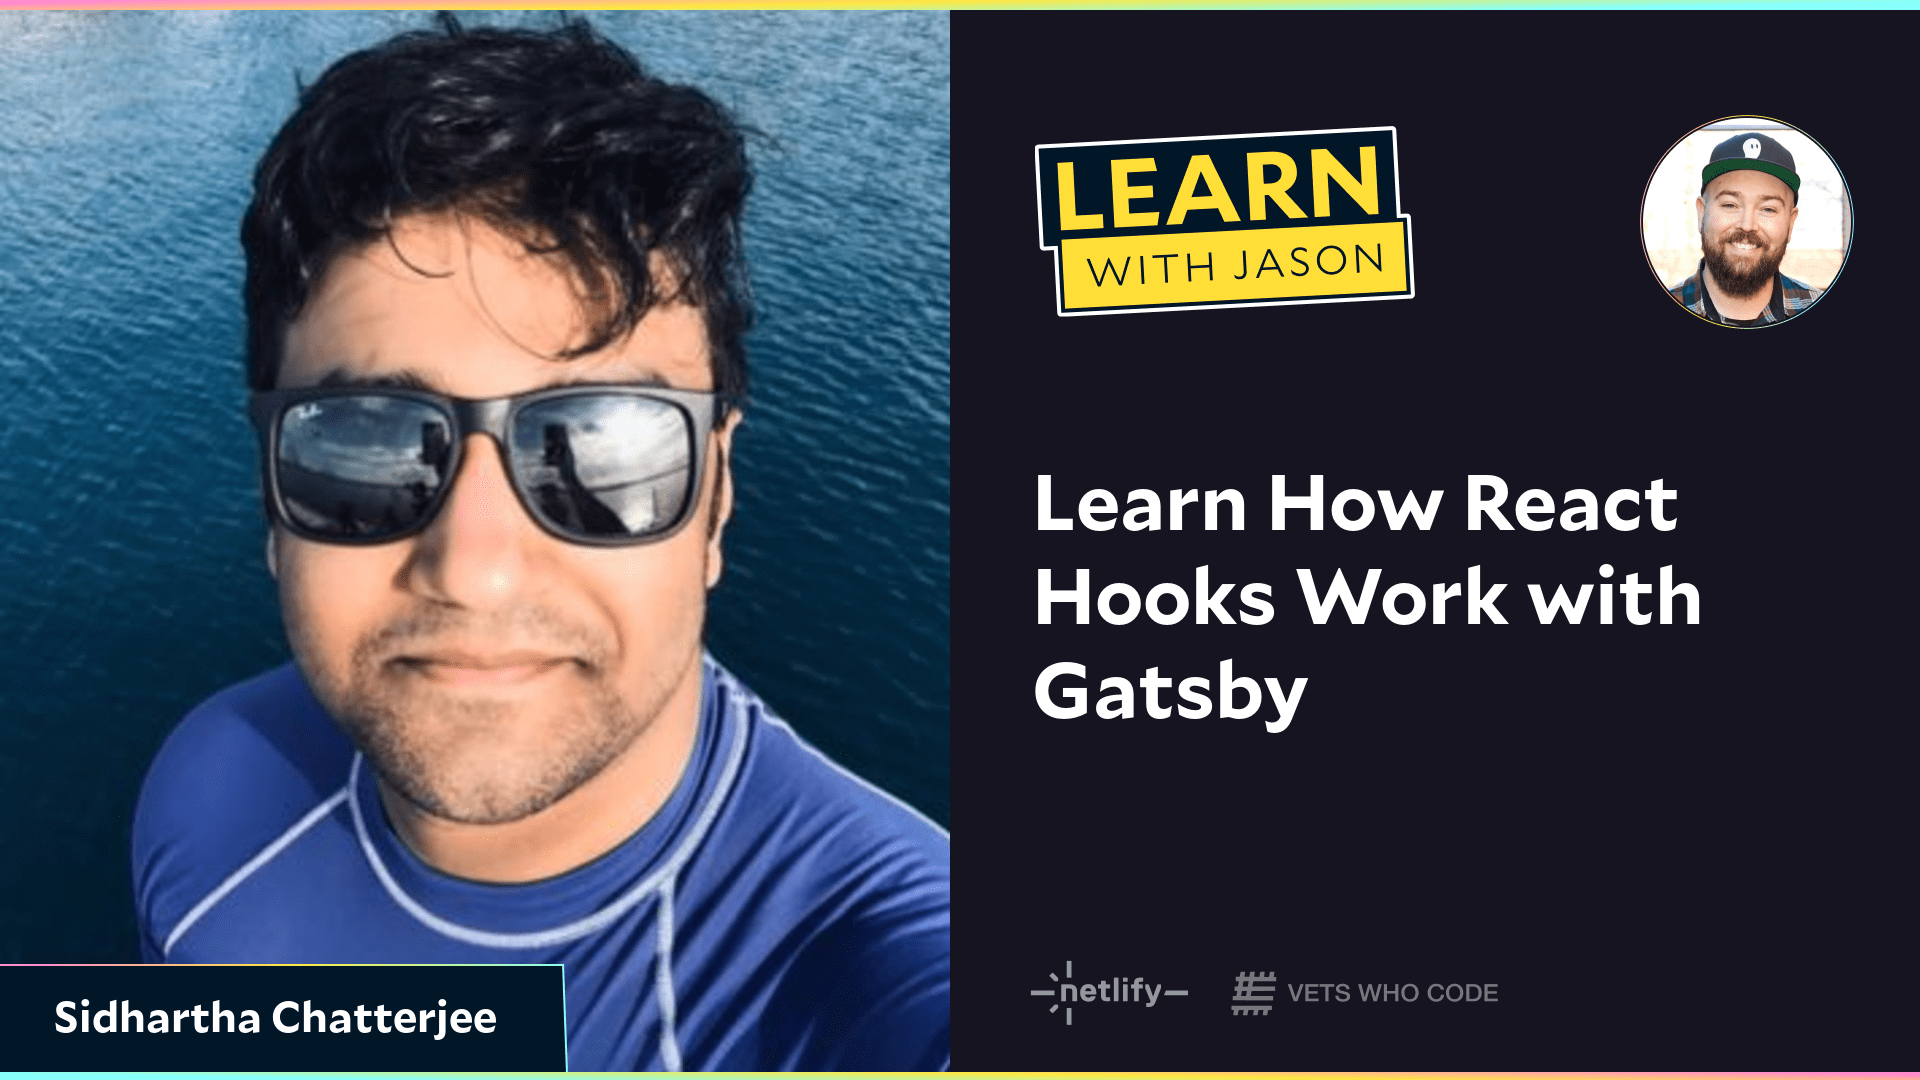 Learn How React Hooks Work with Gatsby (with Sidhartha Chatterjee)